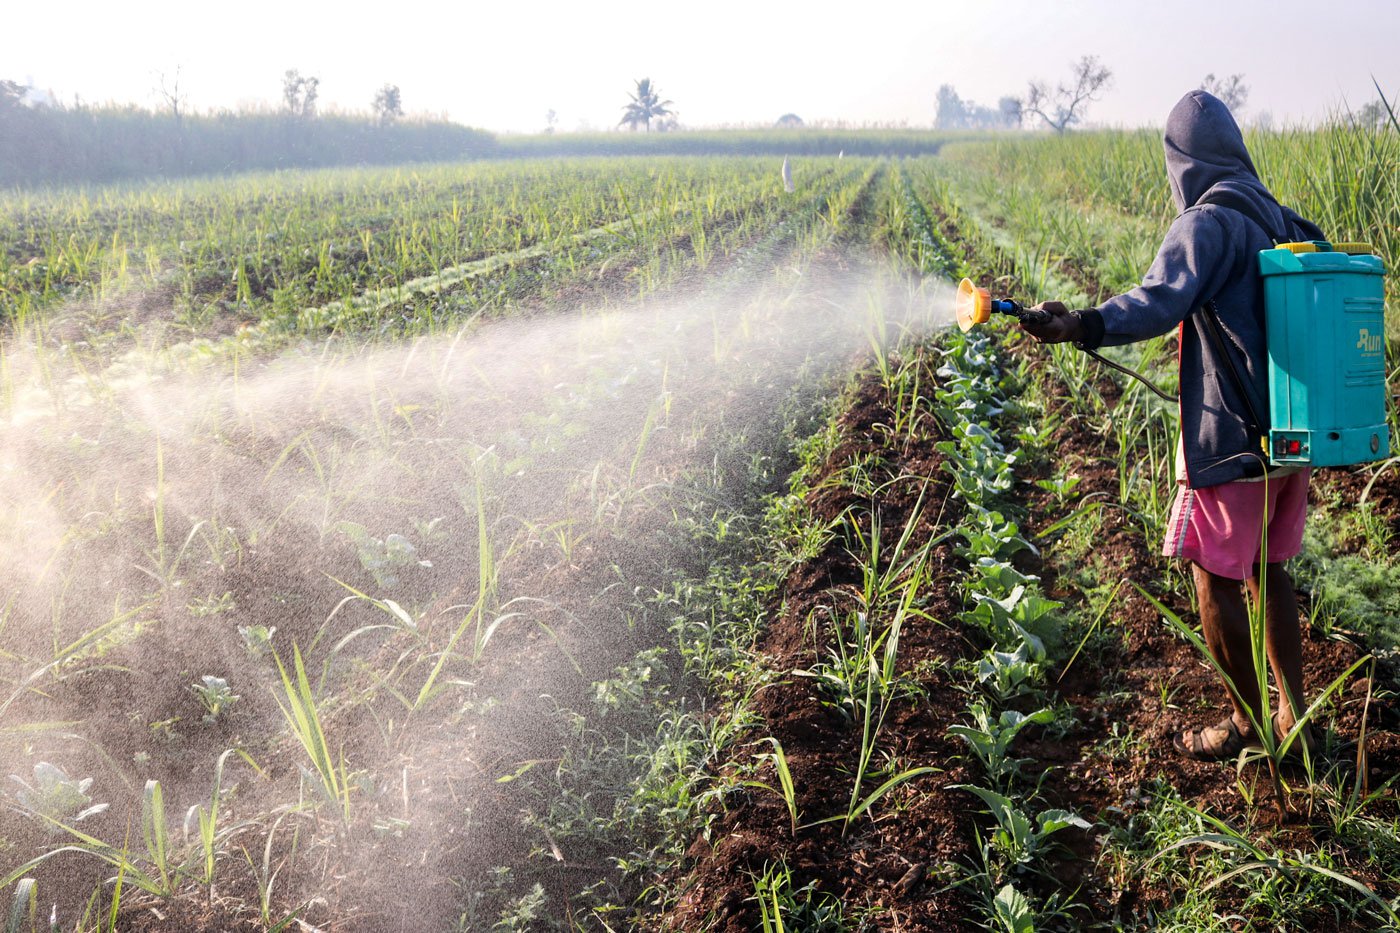 Farmers in the area are increasing their use of pesticides to hurry crop growth before excessive rain descends on their fields